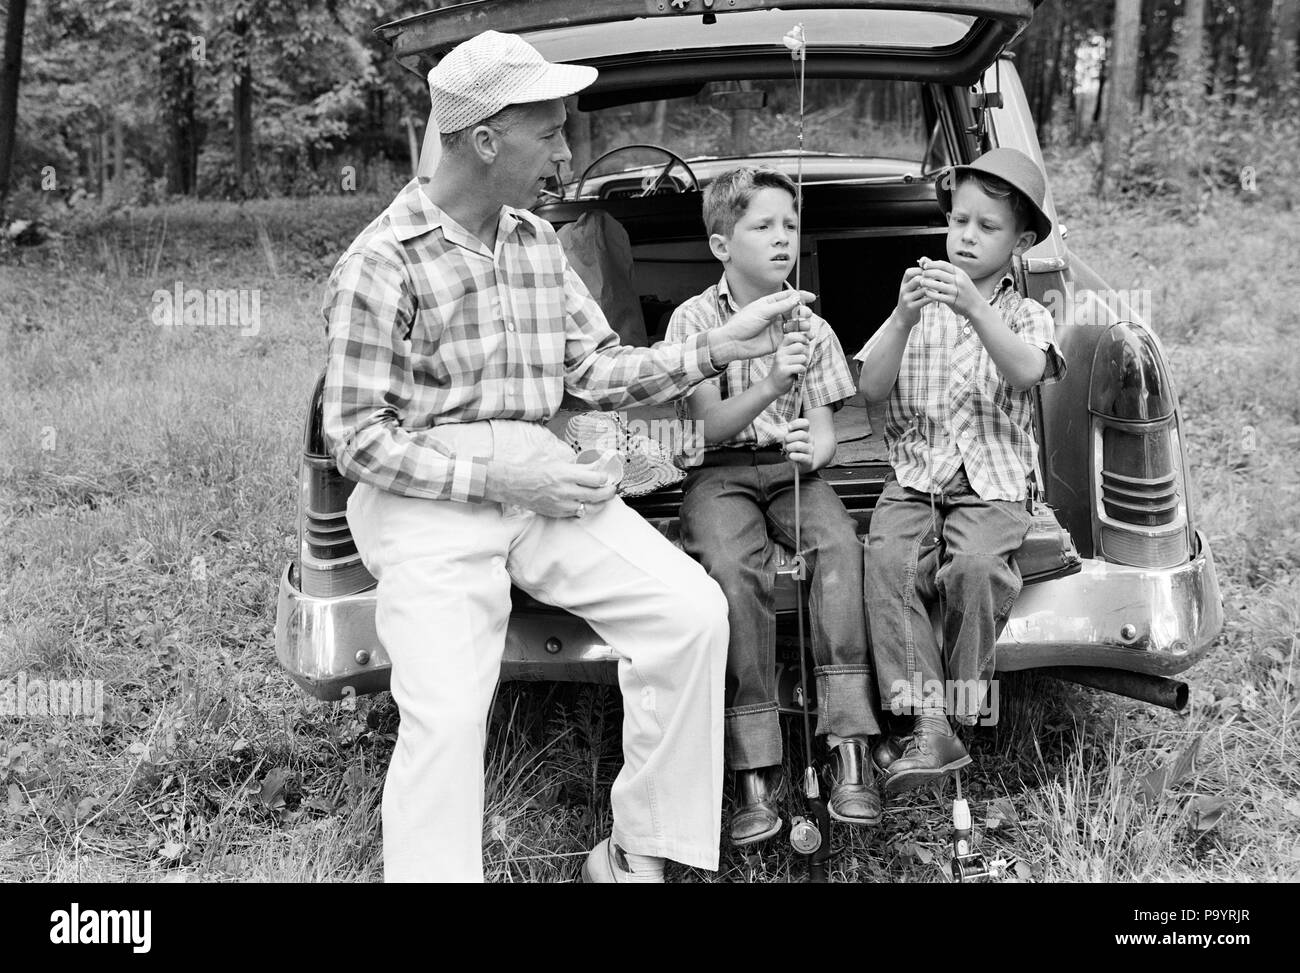 1960s MAN FATHER AND TWO BOYS SONS TWINS SITTING ON REAR BUMPER OF CAR PREPARING FISHING GEAR - a2310 LAN001 HARS TEACHING NOSTALGIA GEAR BROTHER OLD FASHION AUTO 1 JUVENILE VEHICLE TEAMWORK TWIN VACATION SONS IDENTICAL DOUBLE FAMILIES JOY LIFESTYLE PARENTING BROTHERS SHOWING RURAL HEALTHINESS PREPARING FULL-LENGTH PERSONS INSPIRATION MATCH AUTOMOBILE CARING MALES SIBLINGS TRANSPORTATION FATHERS B&W FREEDOM MATCHING SAME TIME OFF HAPPINESS ADVENTURE AND AUTOS GETAWAY DADS KNOWLEDGE BUMPER ON AUTHORITY HOLIDAYS SIBLING INSTRUCTING CONNECTION AUTOMOBILES ESCAPE VEHICLES LOOK-ALIKE DUPLICATE Stock Photo